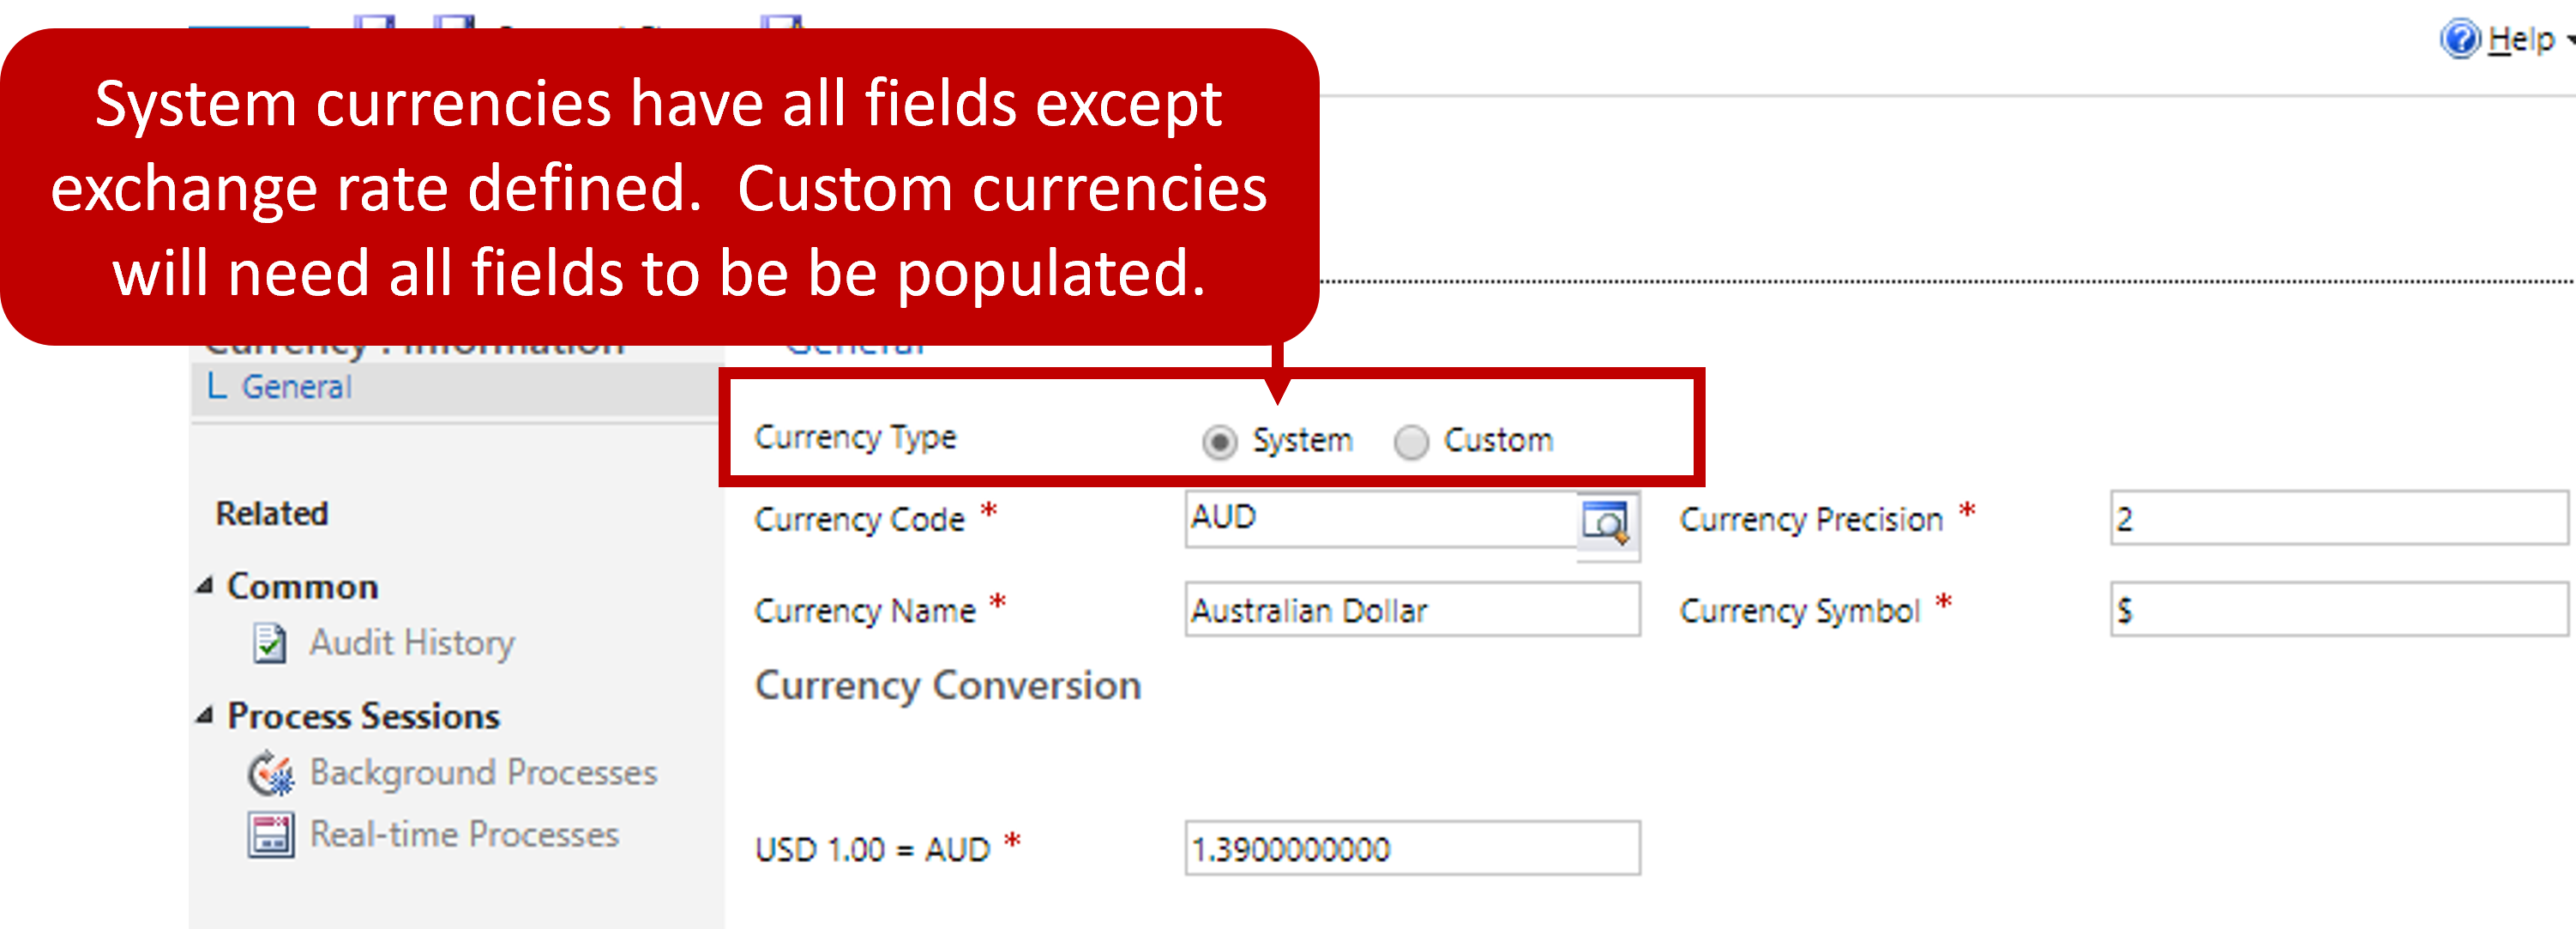 Screenshot showing System currencies with the note System currencies have all fields except exchange rate defined. Custom currencies need all fields to be populated.